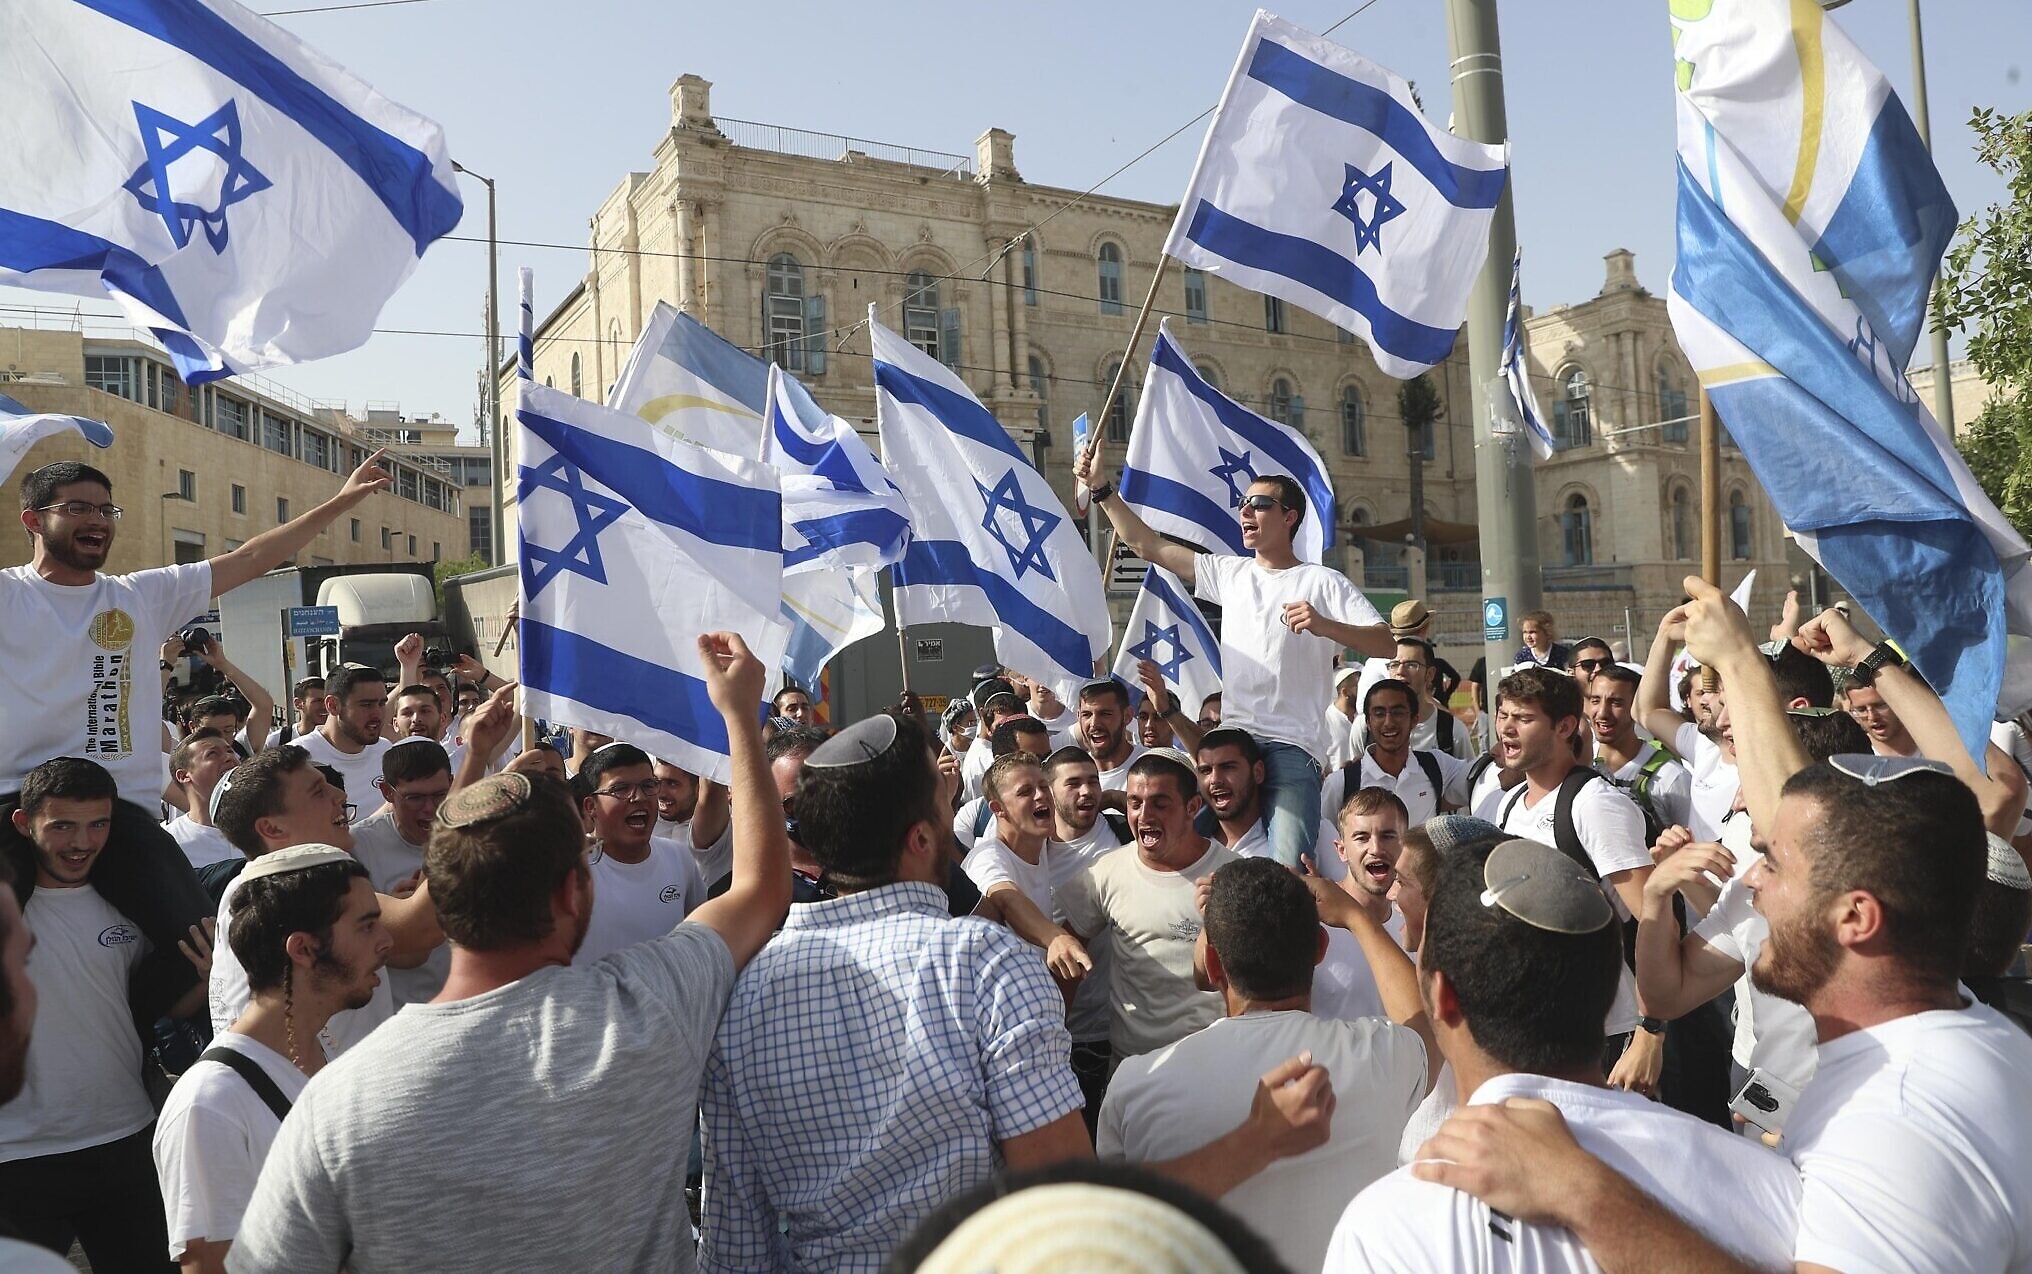 Israel will hold its Jerusalem Day flag march today